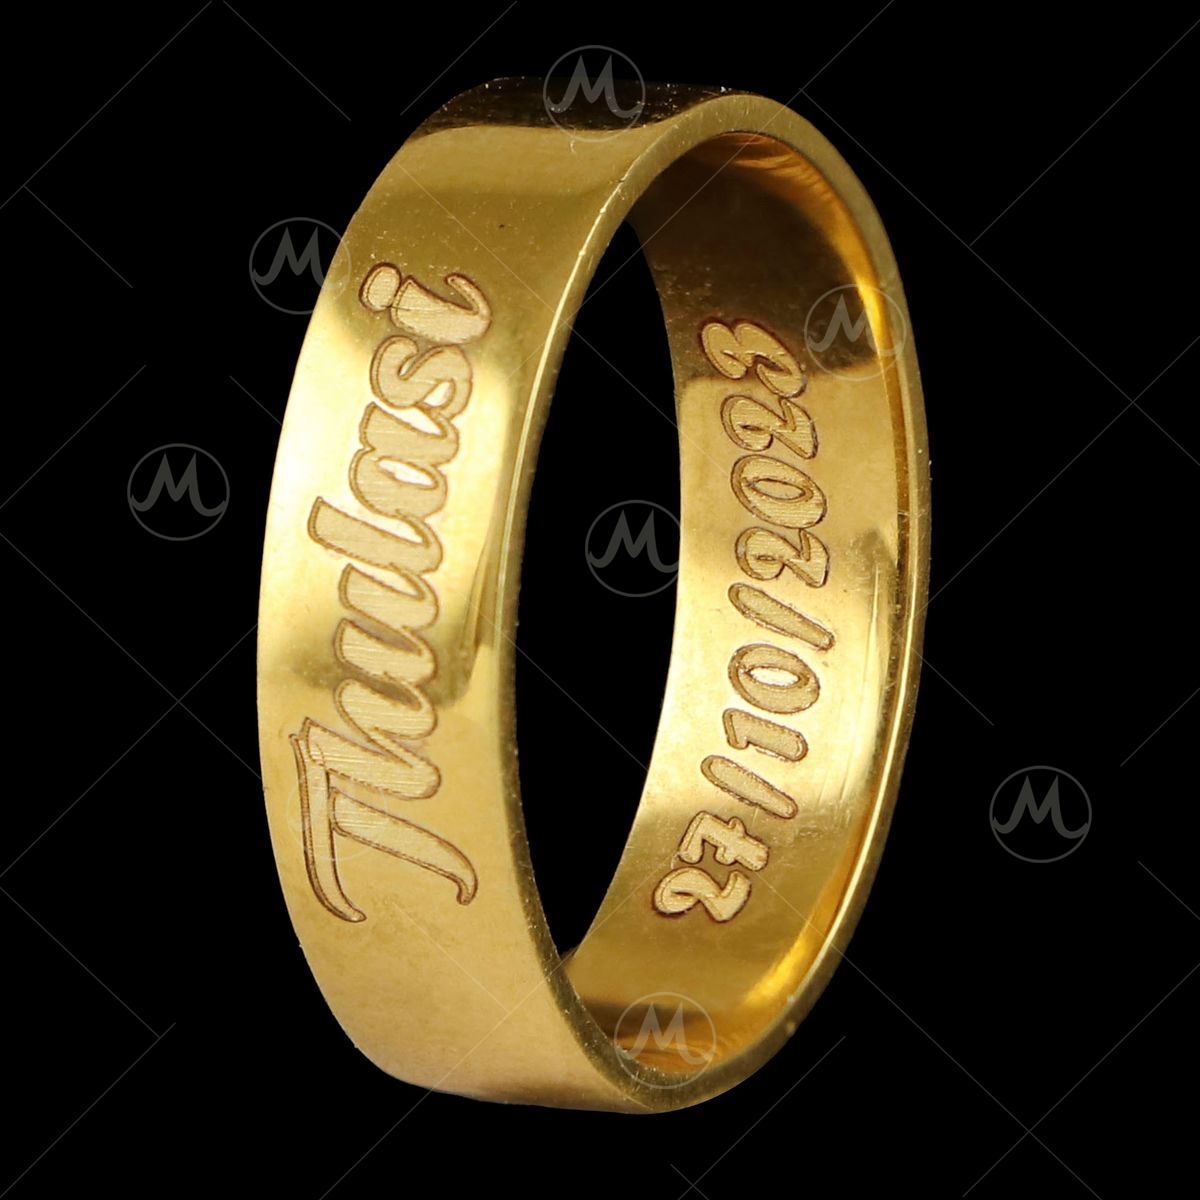 Gold Rings Wedding Two On Black Background Backgrounds | JPG Free Download  - Pikbest